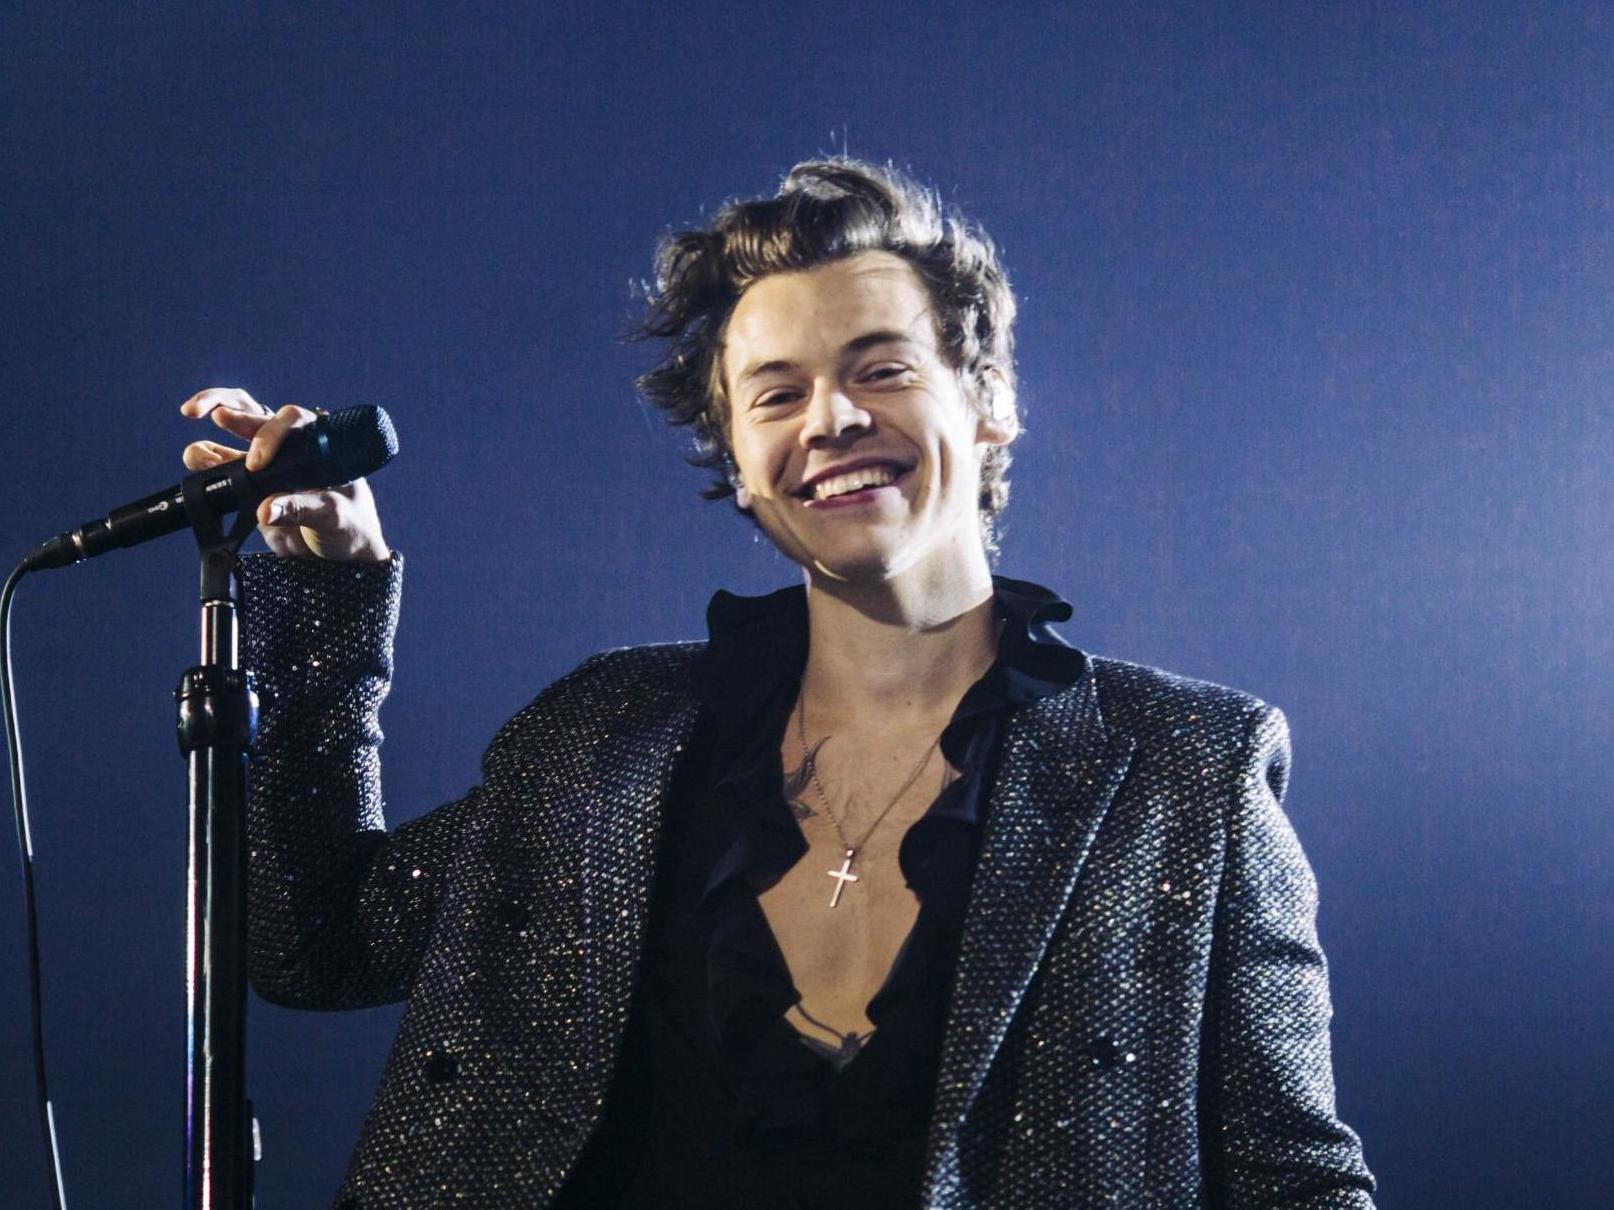 Harry Styles could play Prince Eric in the forthcoming live-action remake of The Little Mermaid